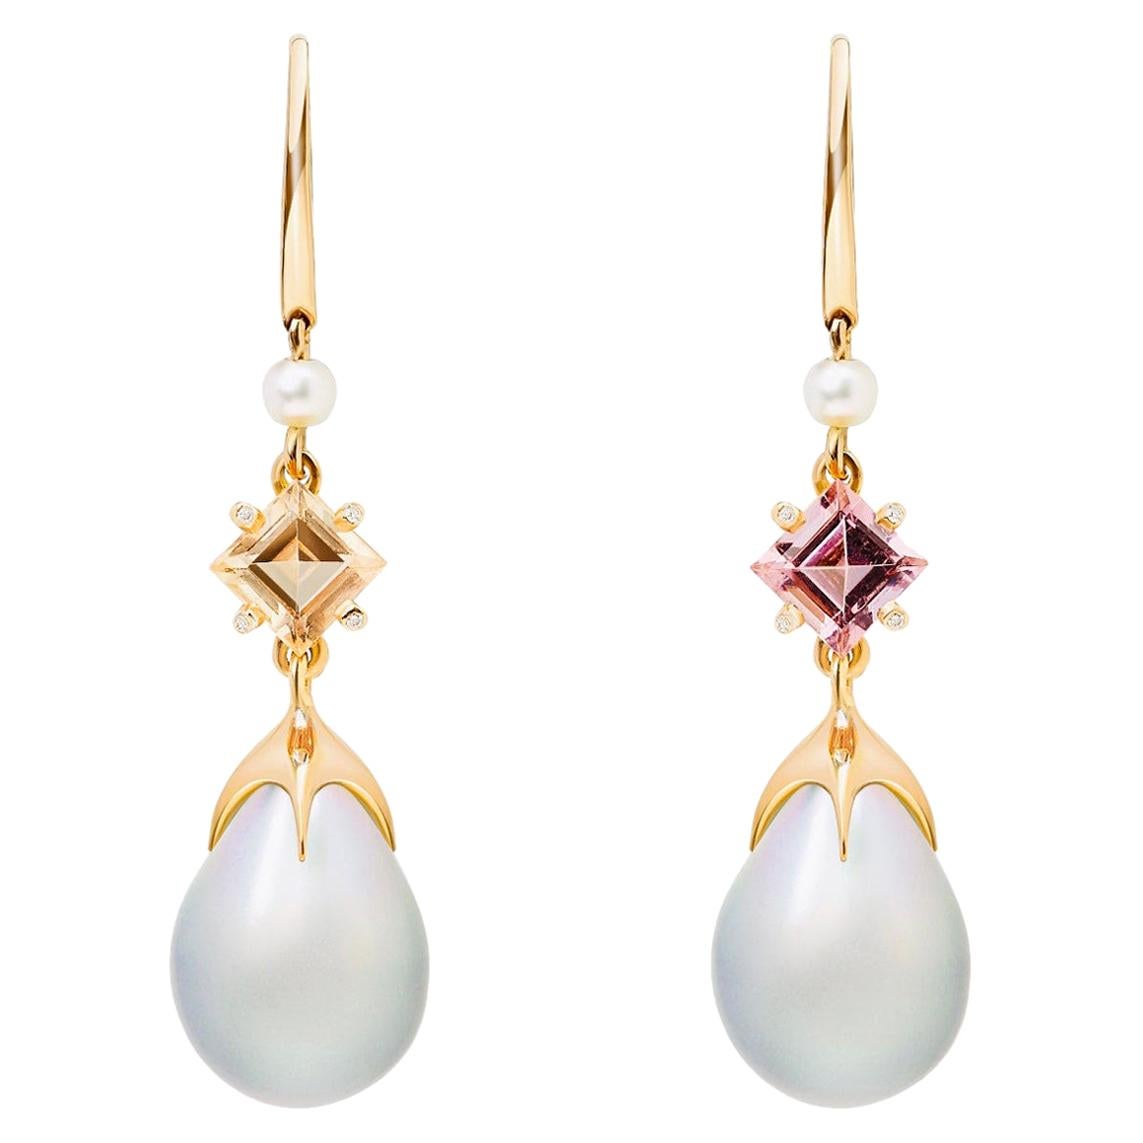 Soraya 18 Karat Gold, Pink and Golden Tourmalines, Diamonds and Pearls Earrings For Sale